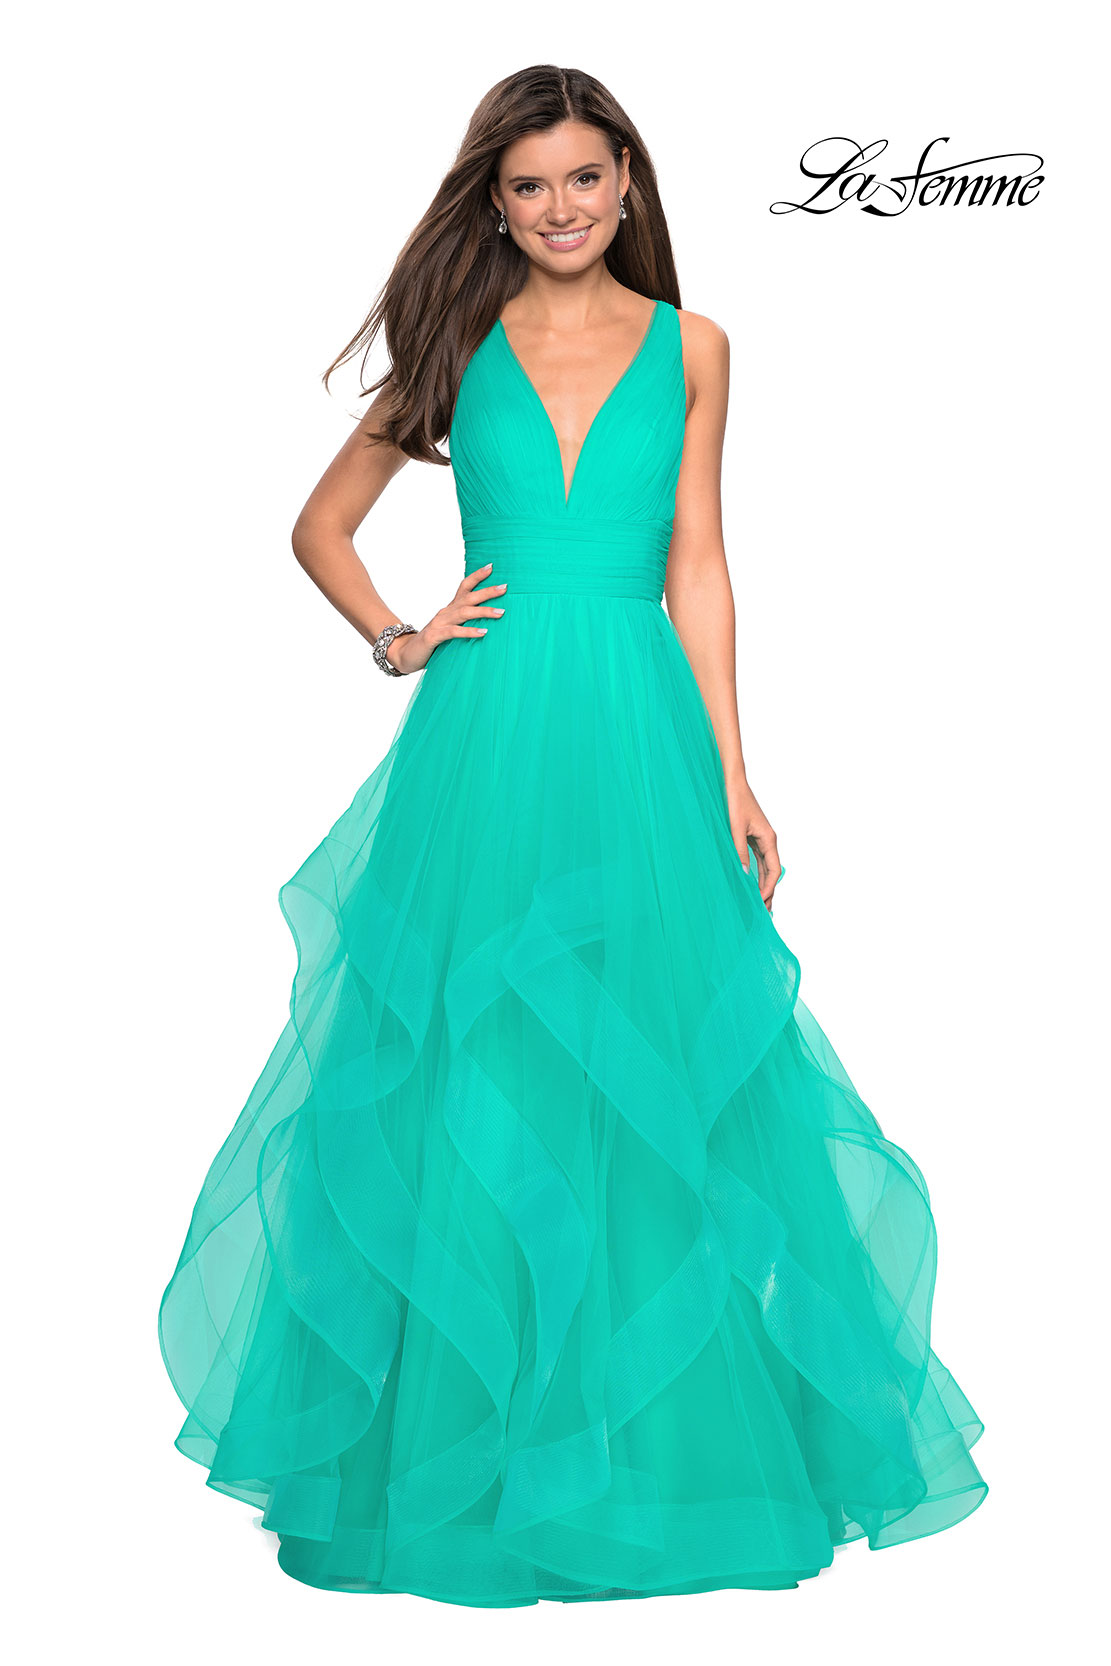 House of Wu 26915 Keyhole Neck Quinceanera Gown - MadameBridal.com